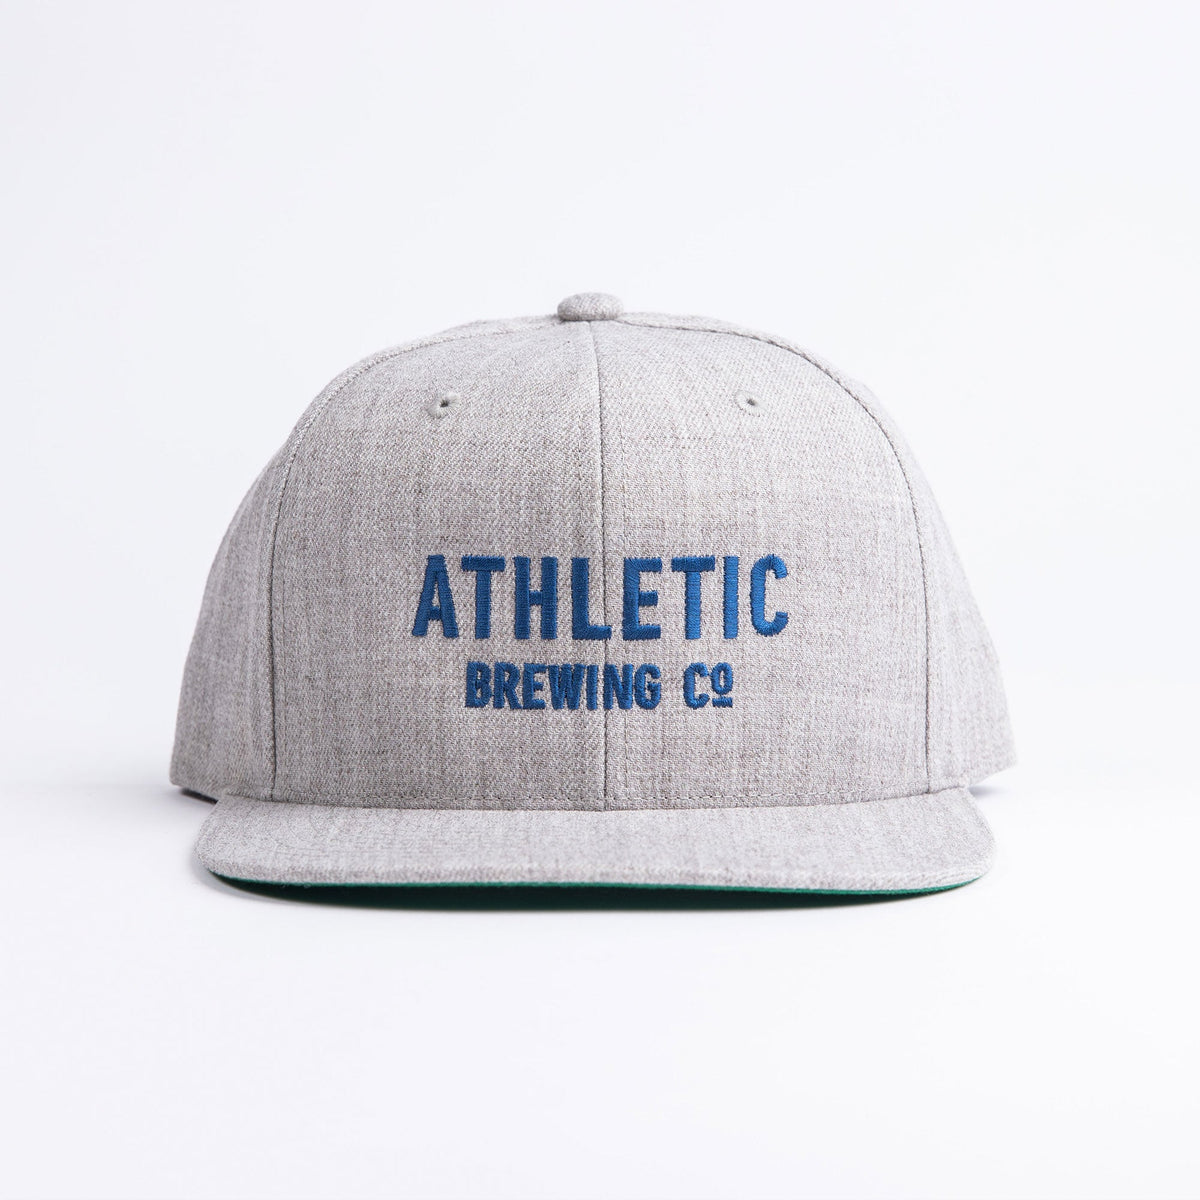 Athletic Brewing Co Lettering Hat - Grey